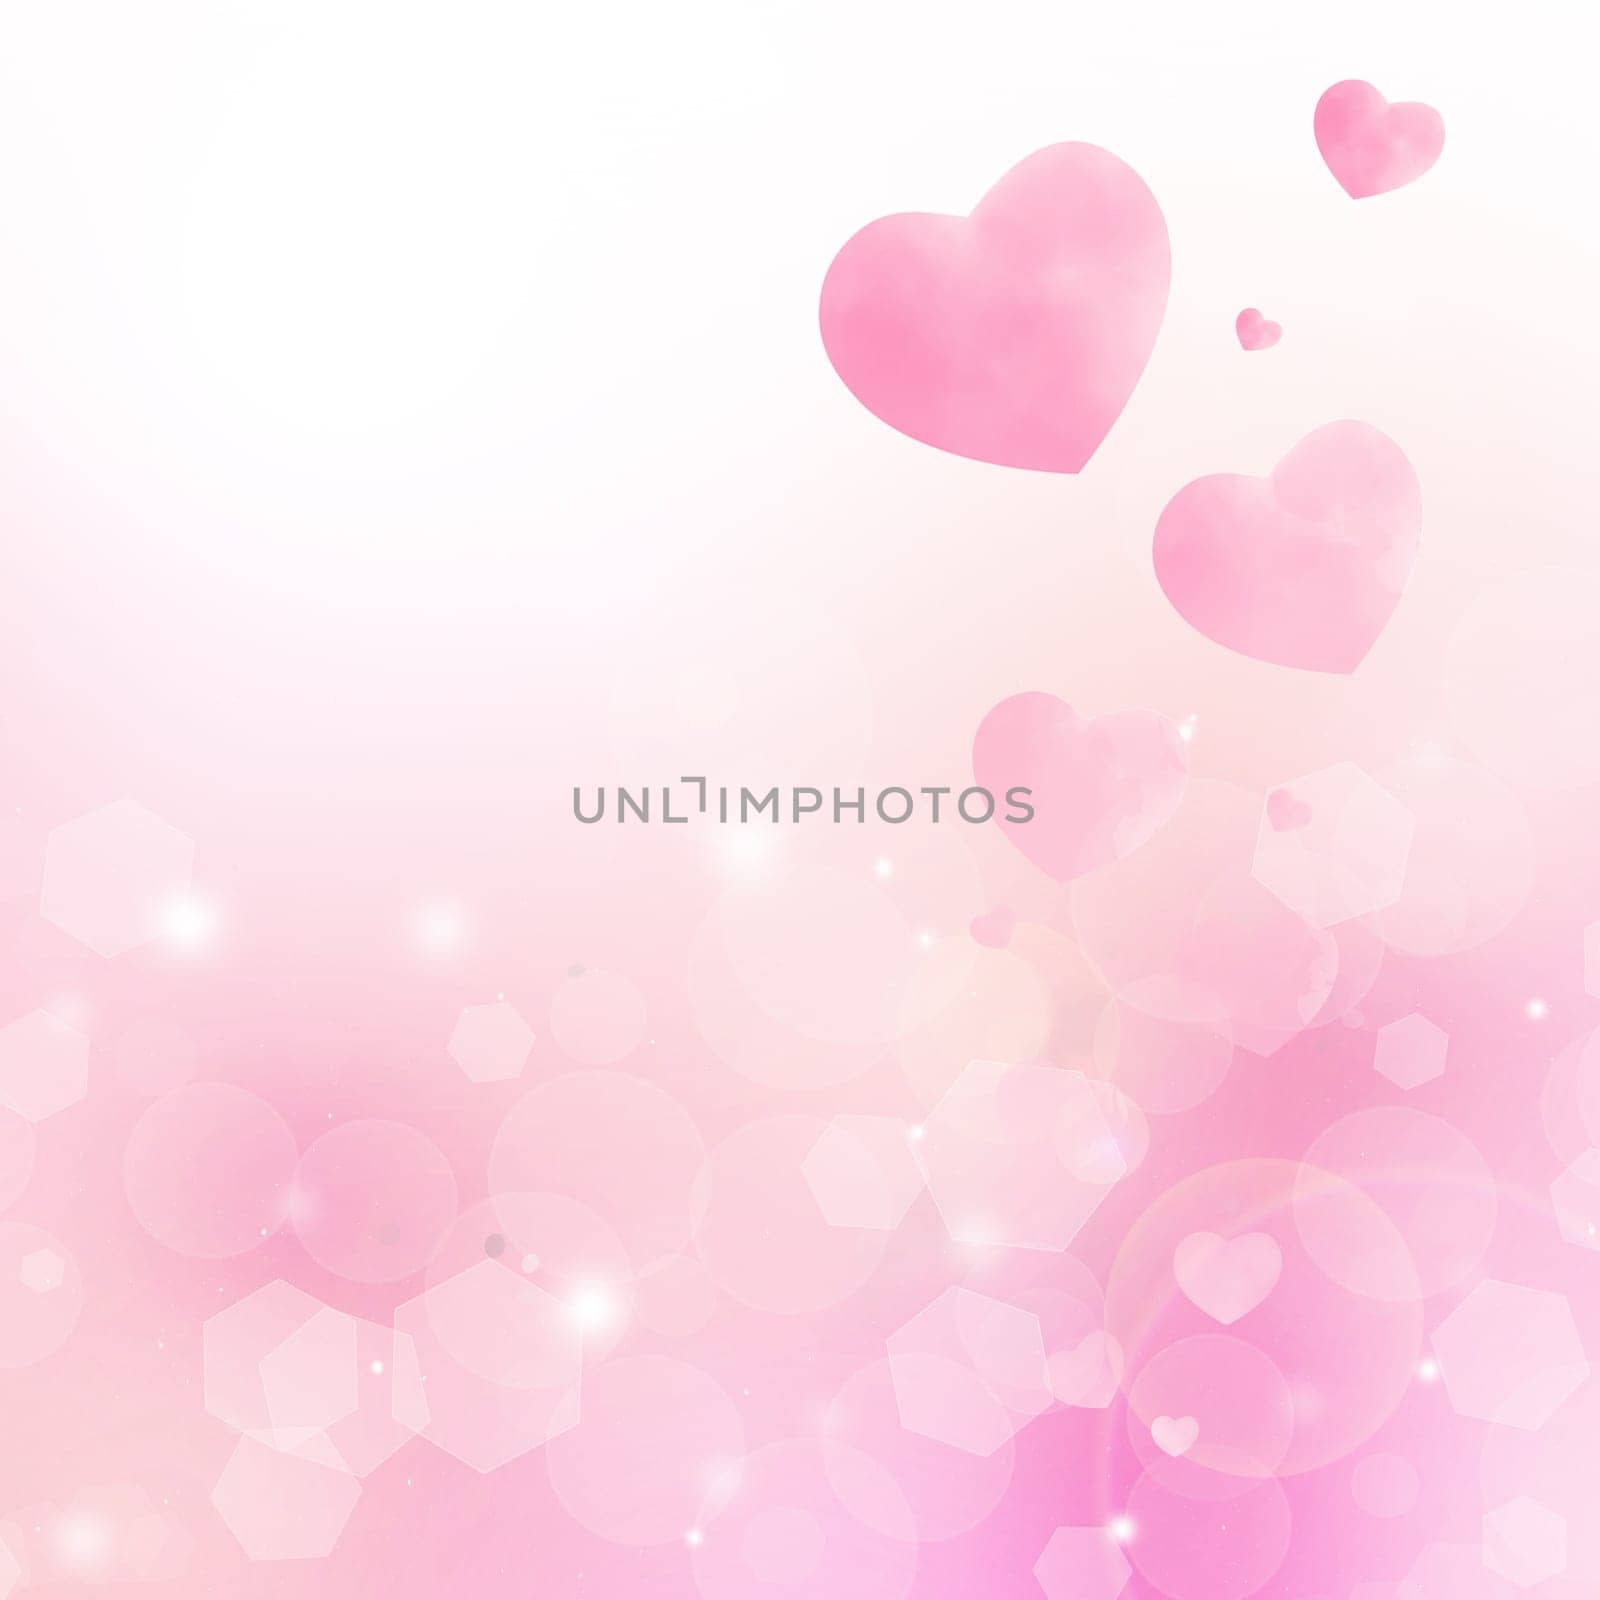 Illustration, hearts and creative shape for care or devotion, care and pink background. Collection, romance and bokeh for valentines day celebration, icon and abstract for support or peace emotion.